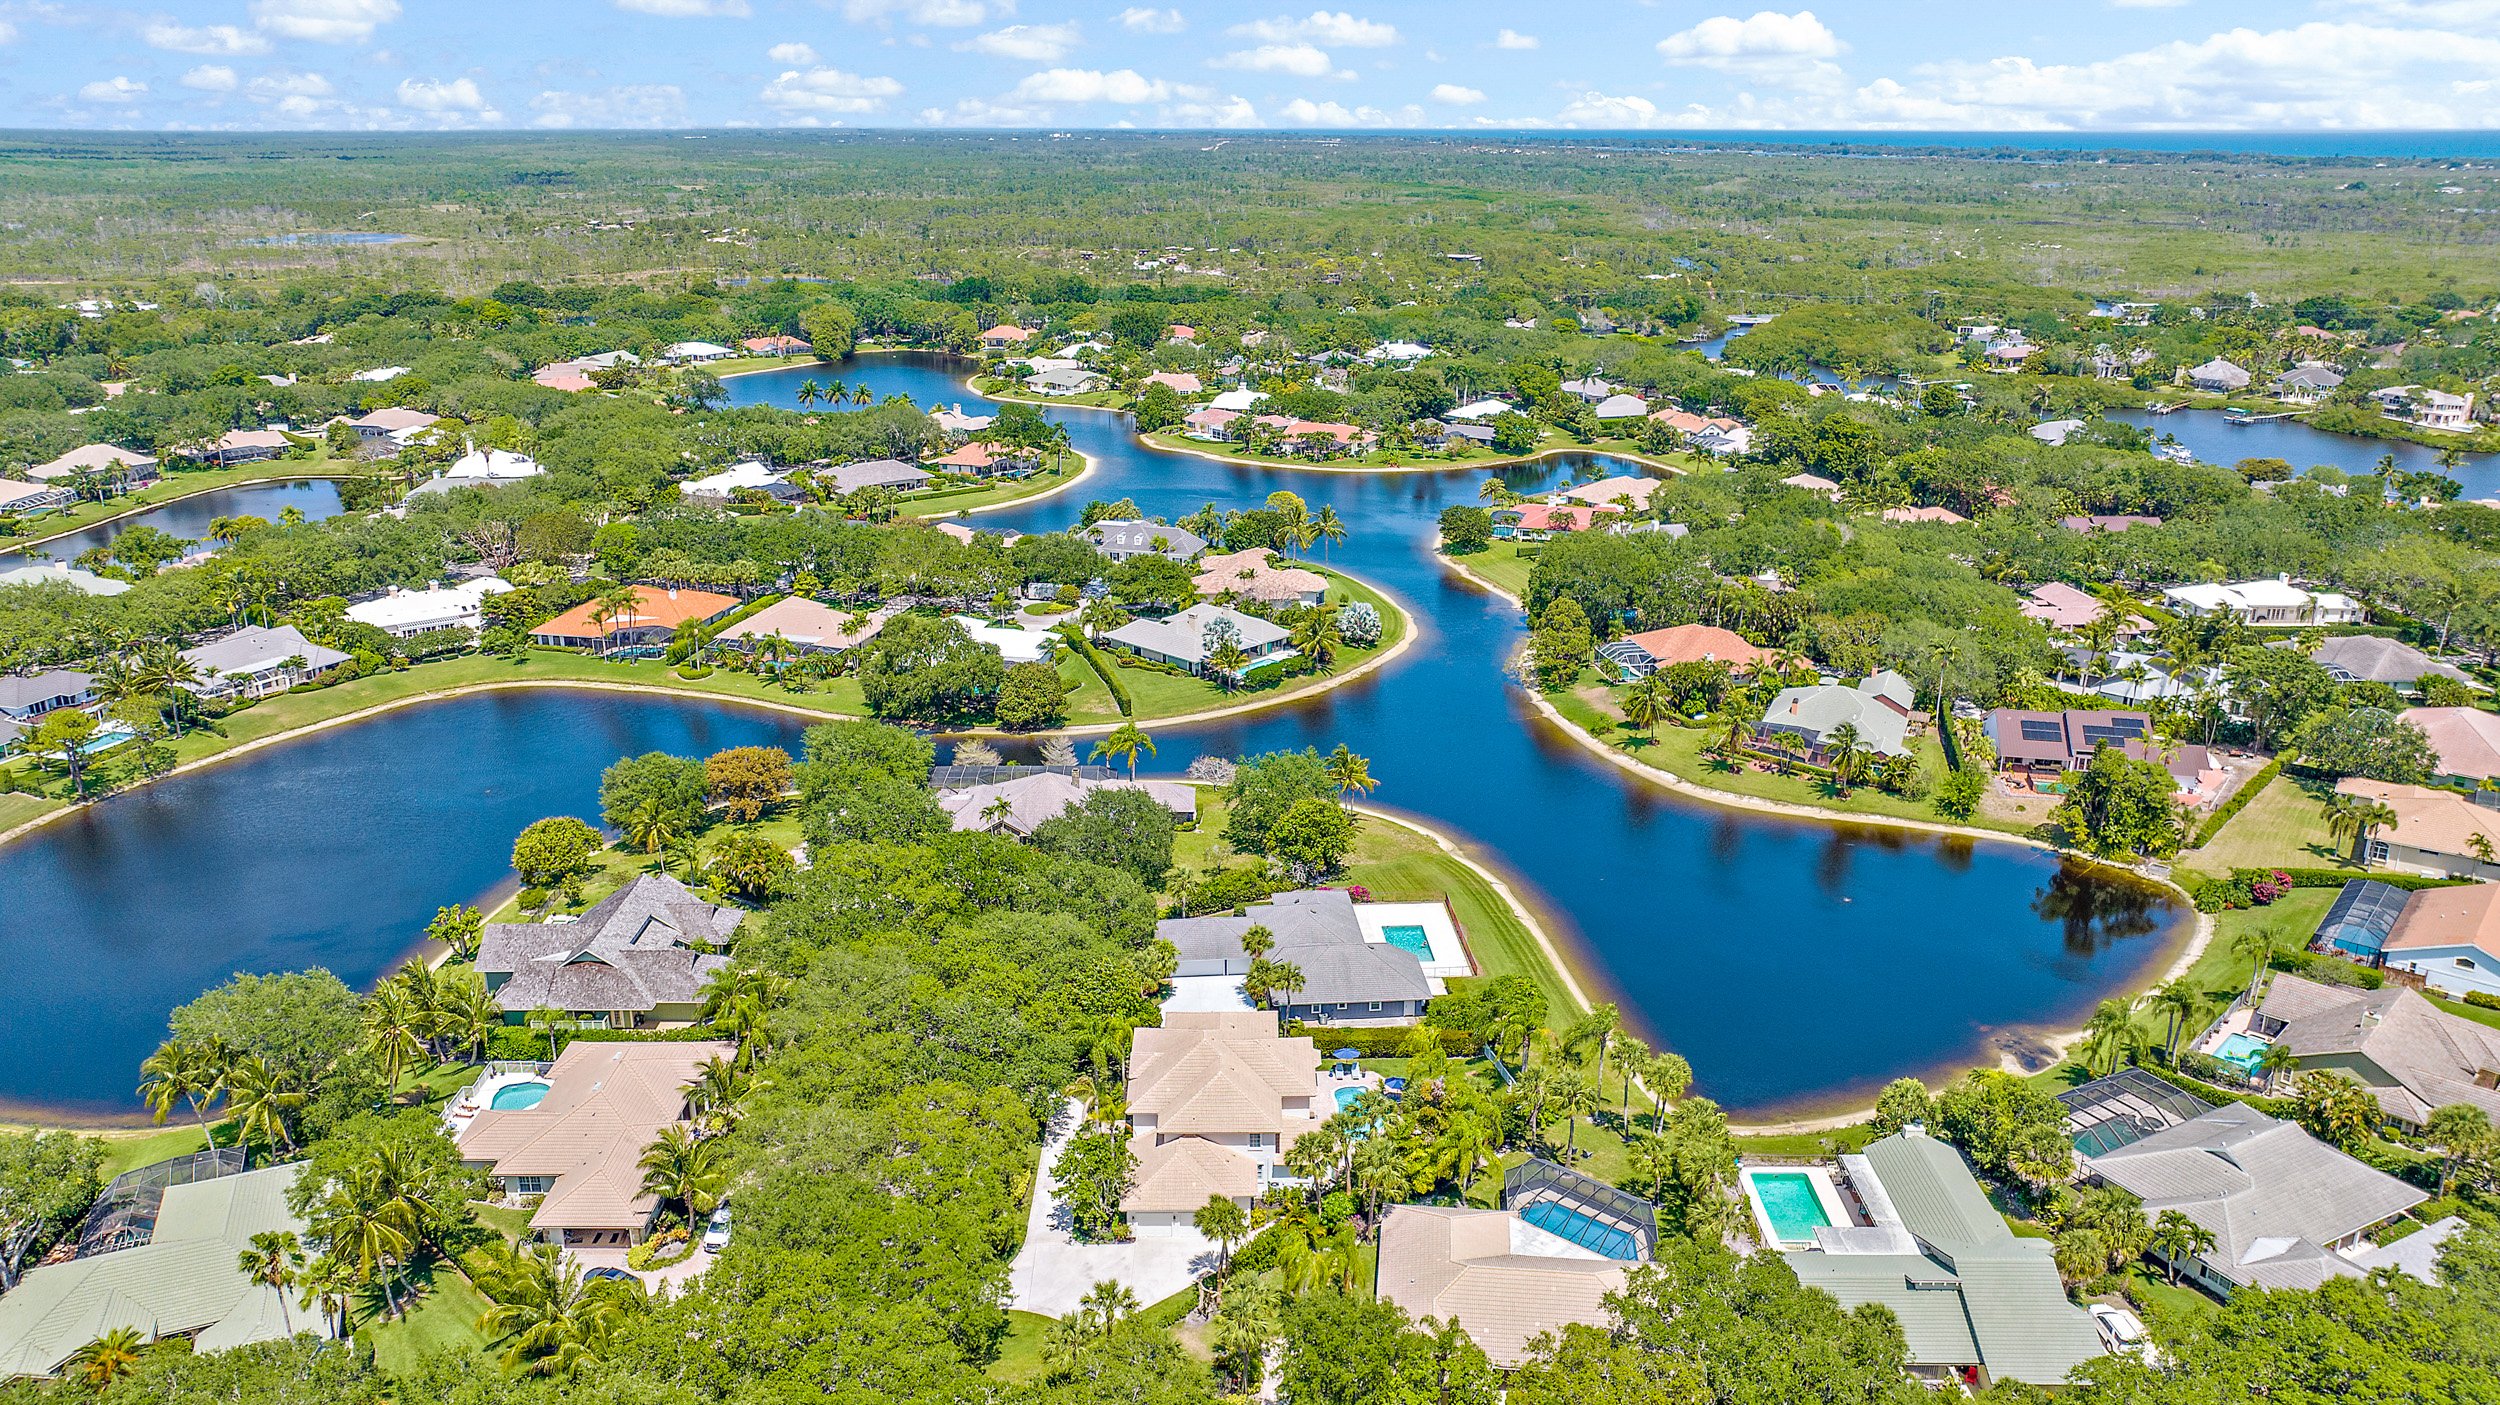 Luxury home for sale in Tequesta